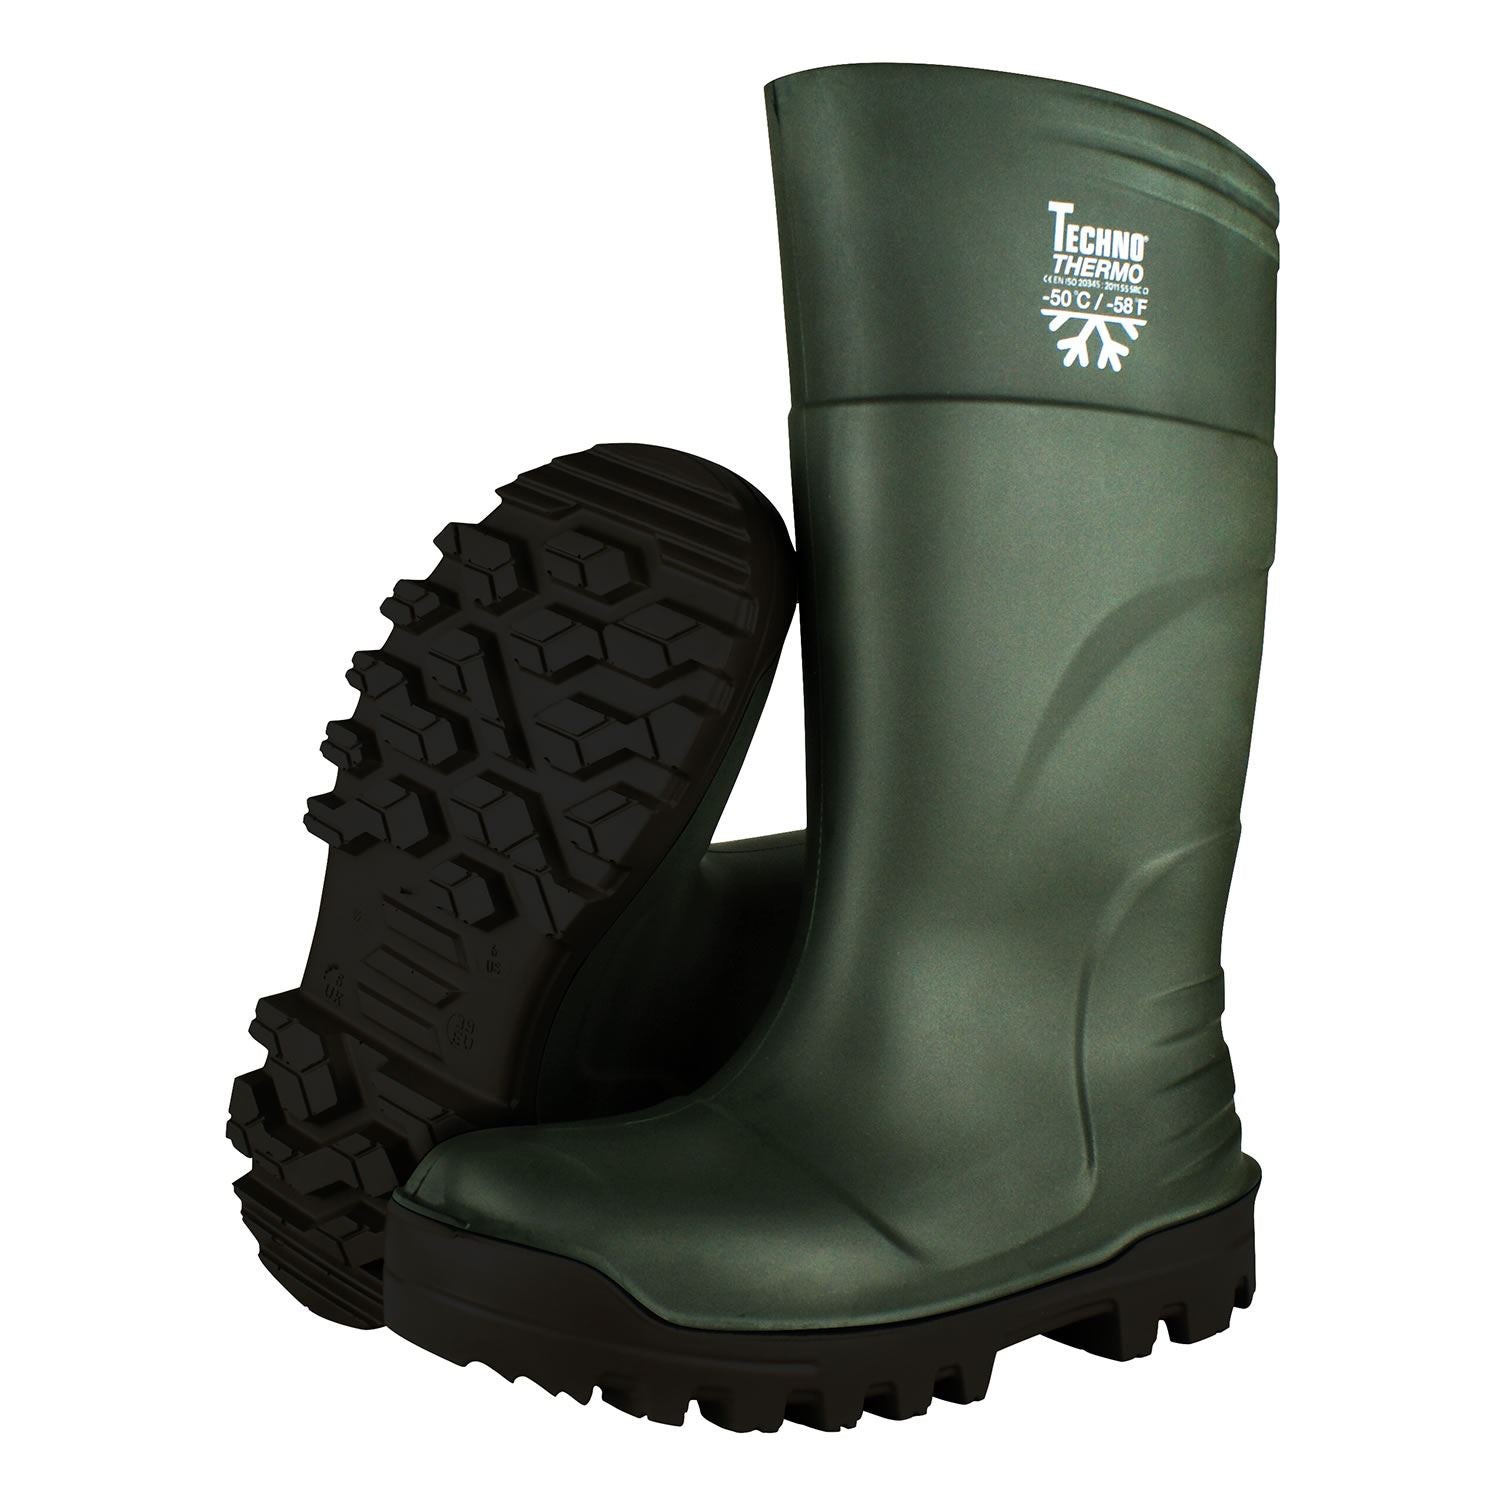 Troya Techno Wellingtons Thermo Safety - Just Horse Riders